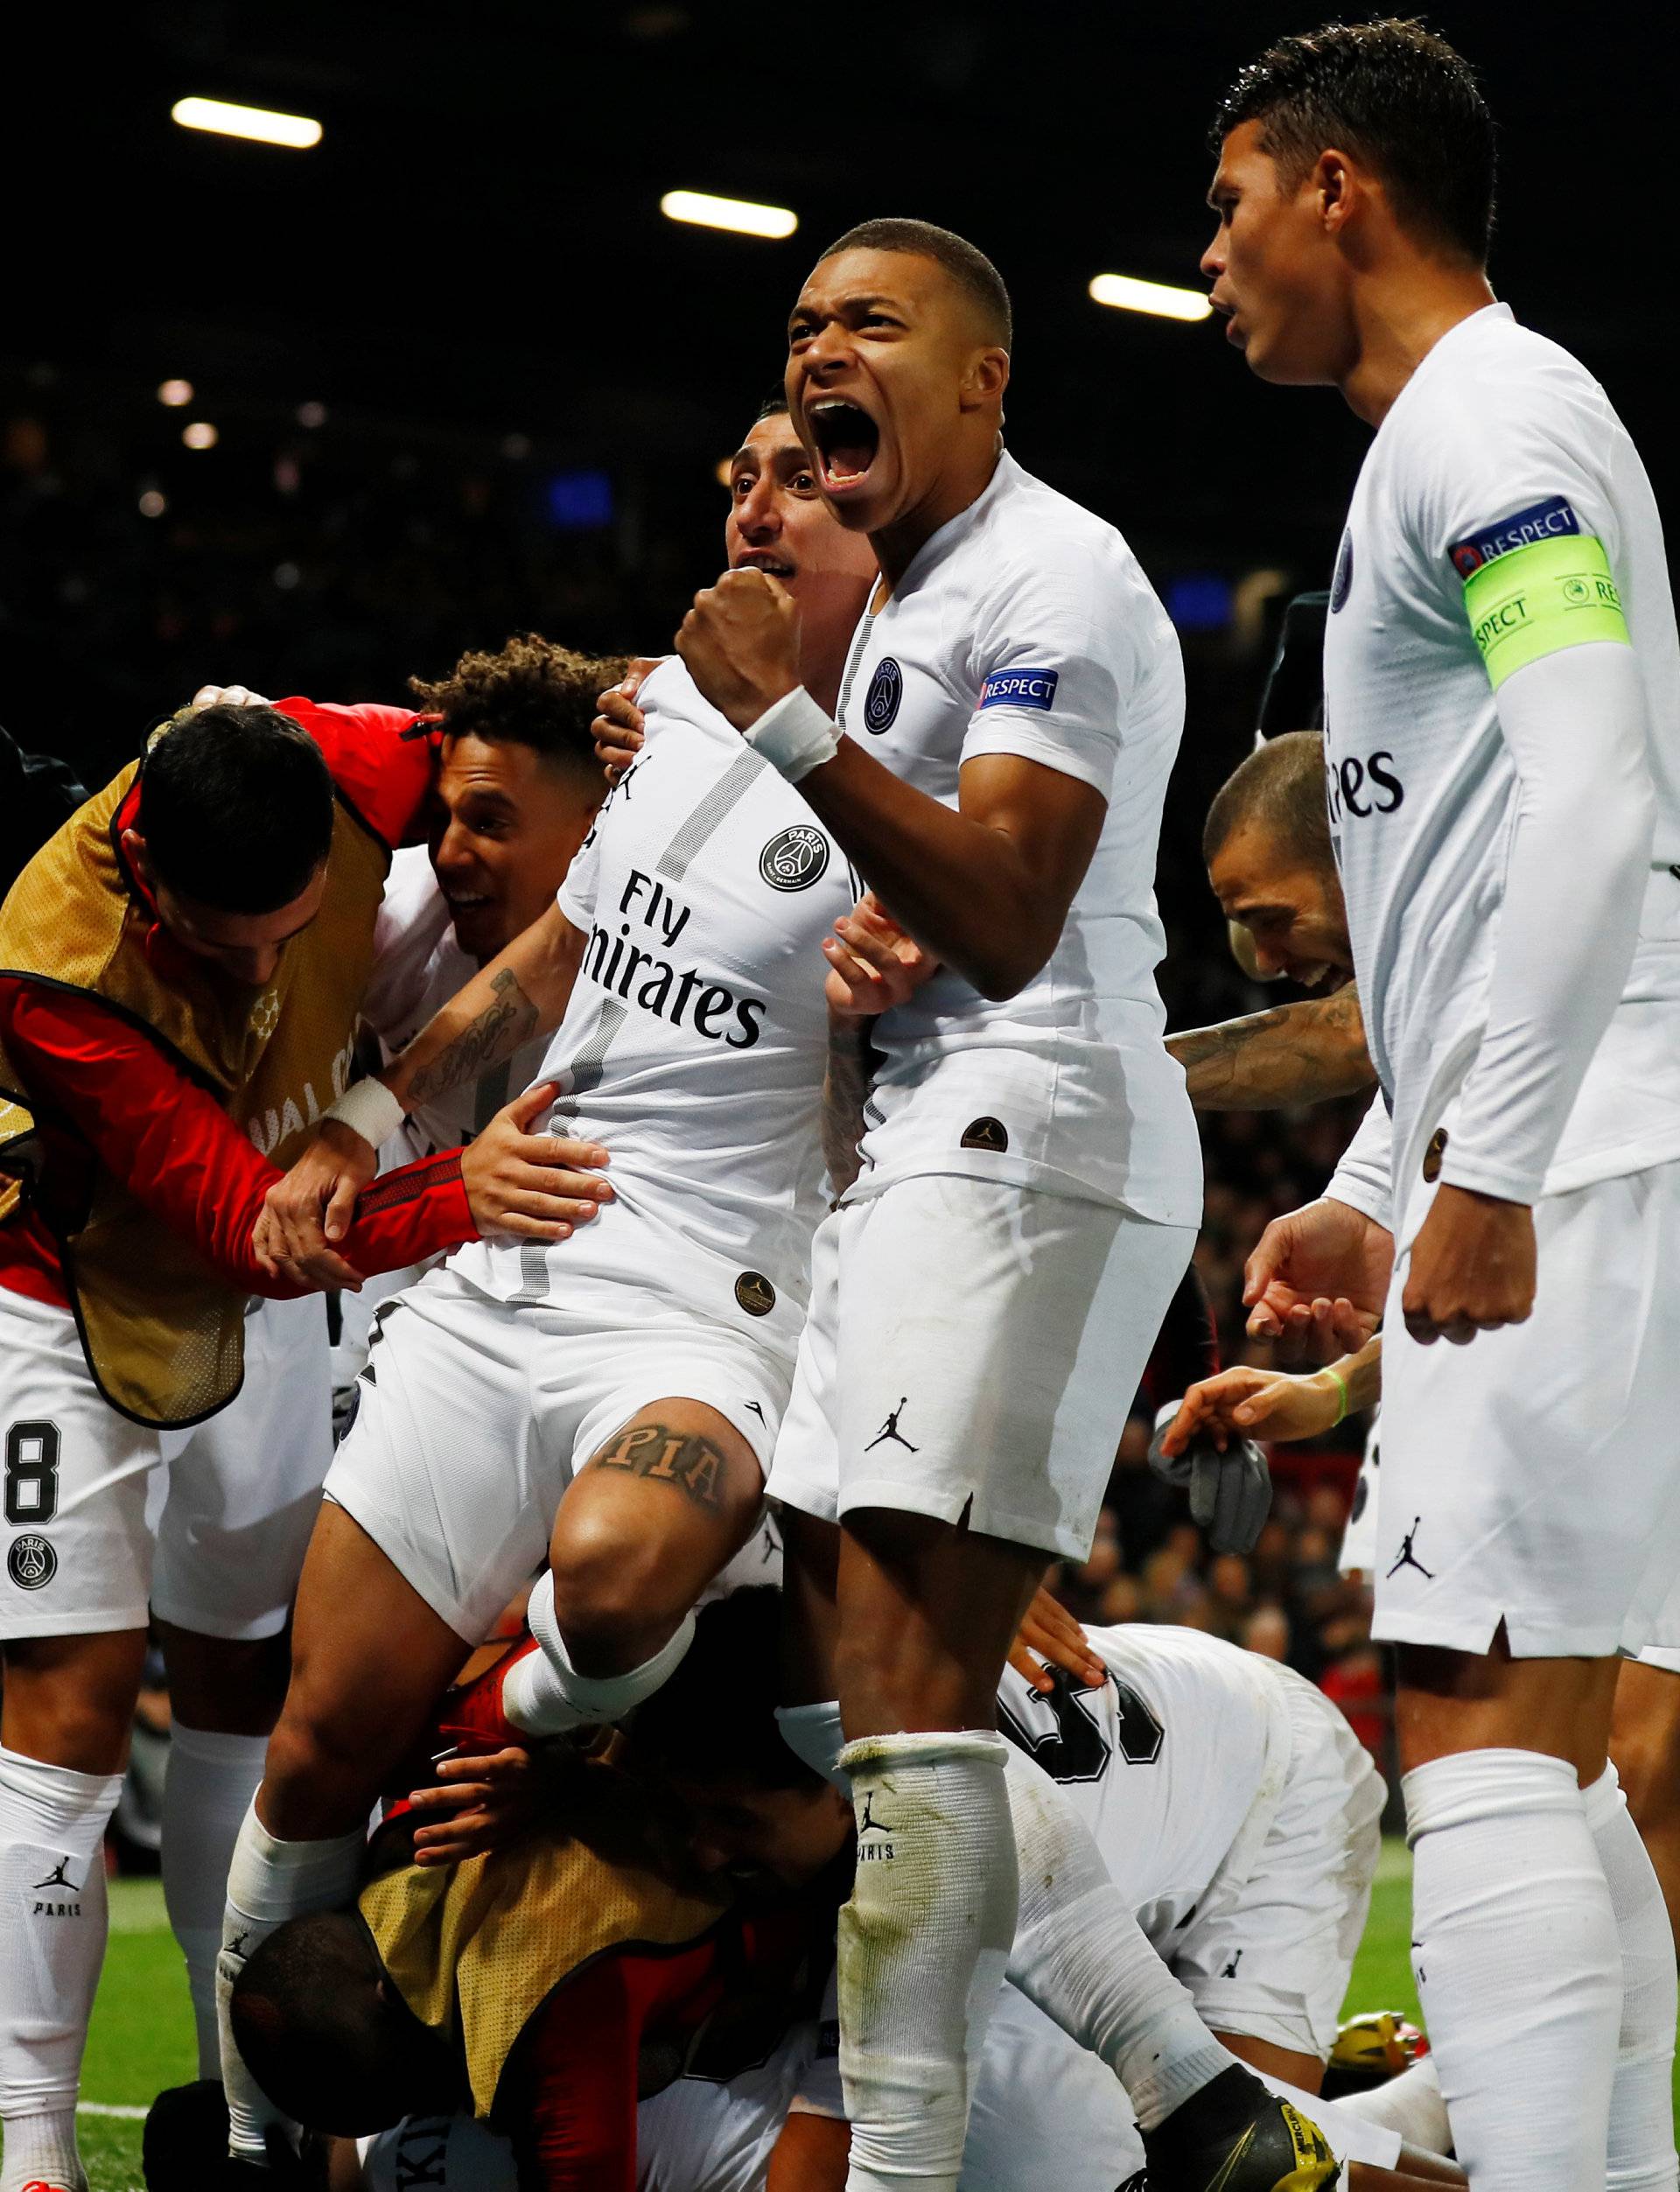 Champions League Round of 16 First Leg - Manchester United v Paris St Germain